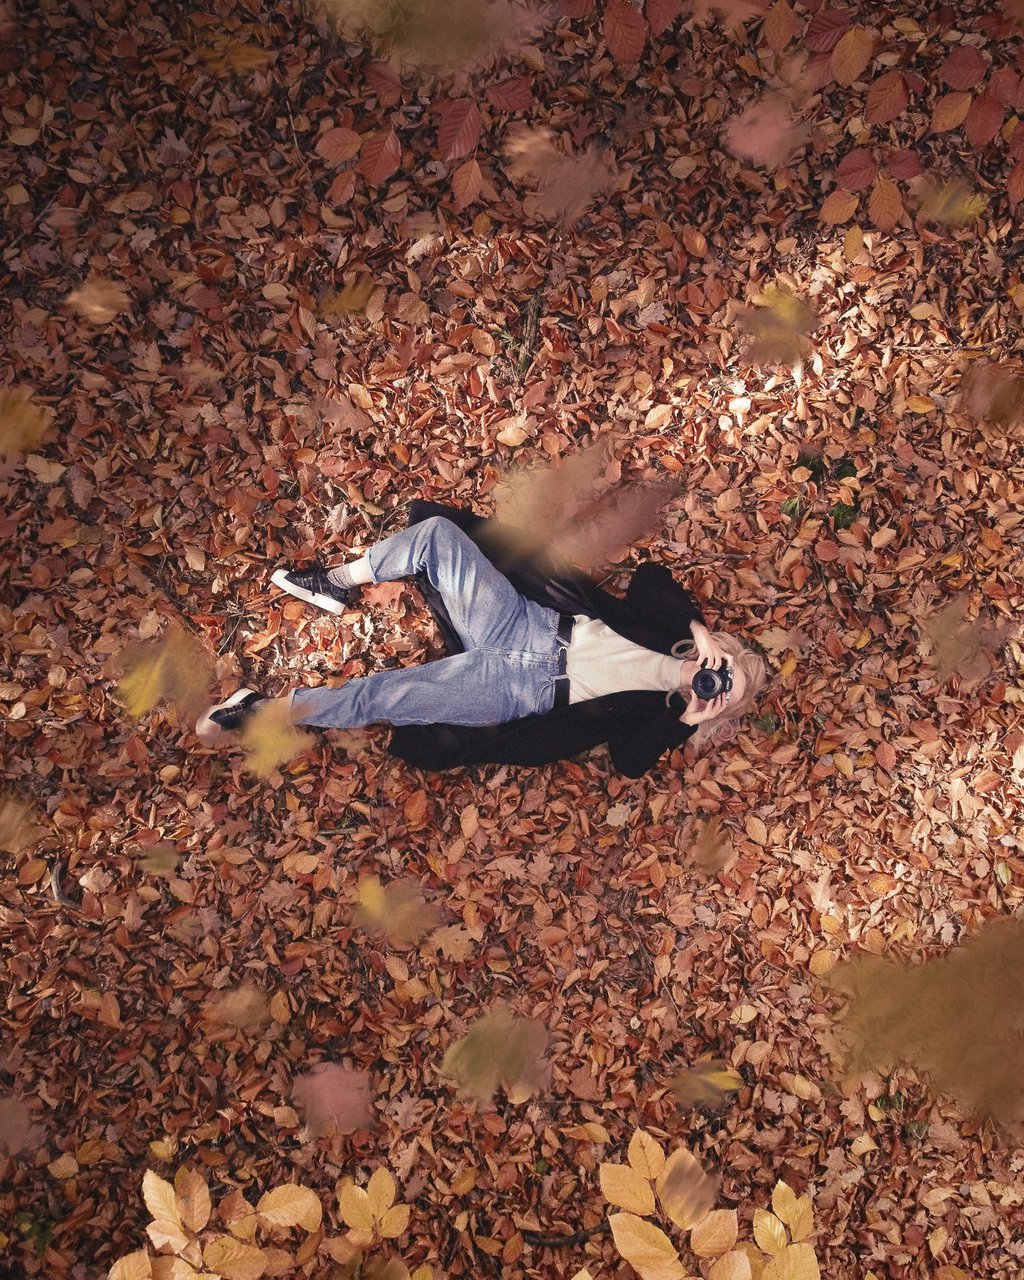 Laying in leaves photo from unsplash